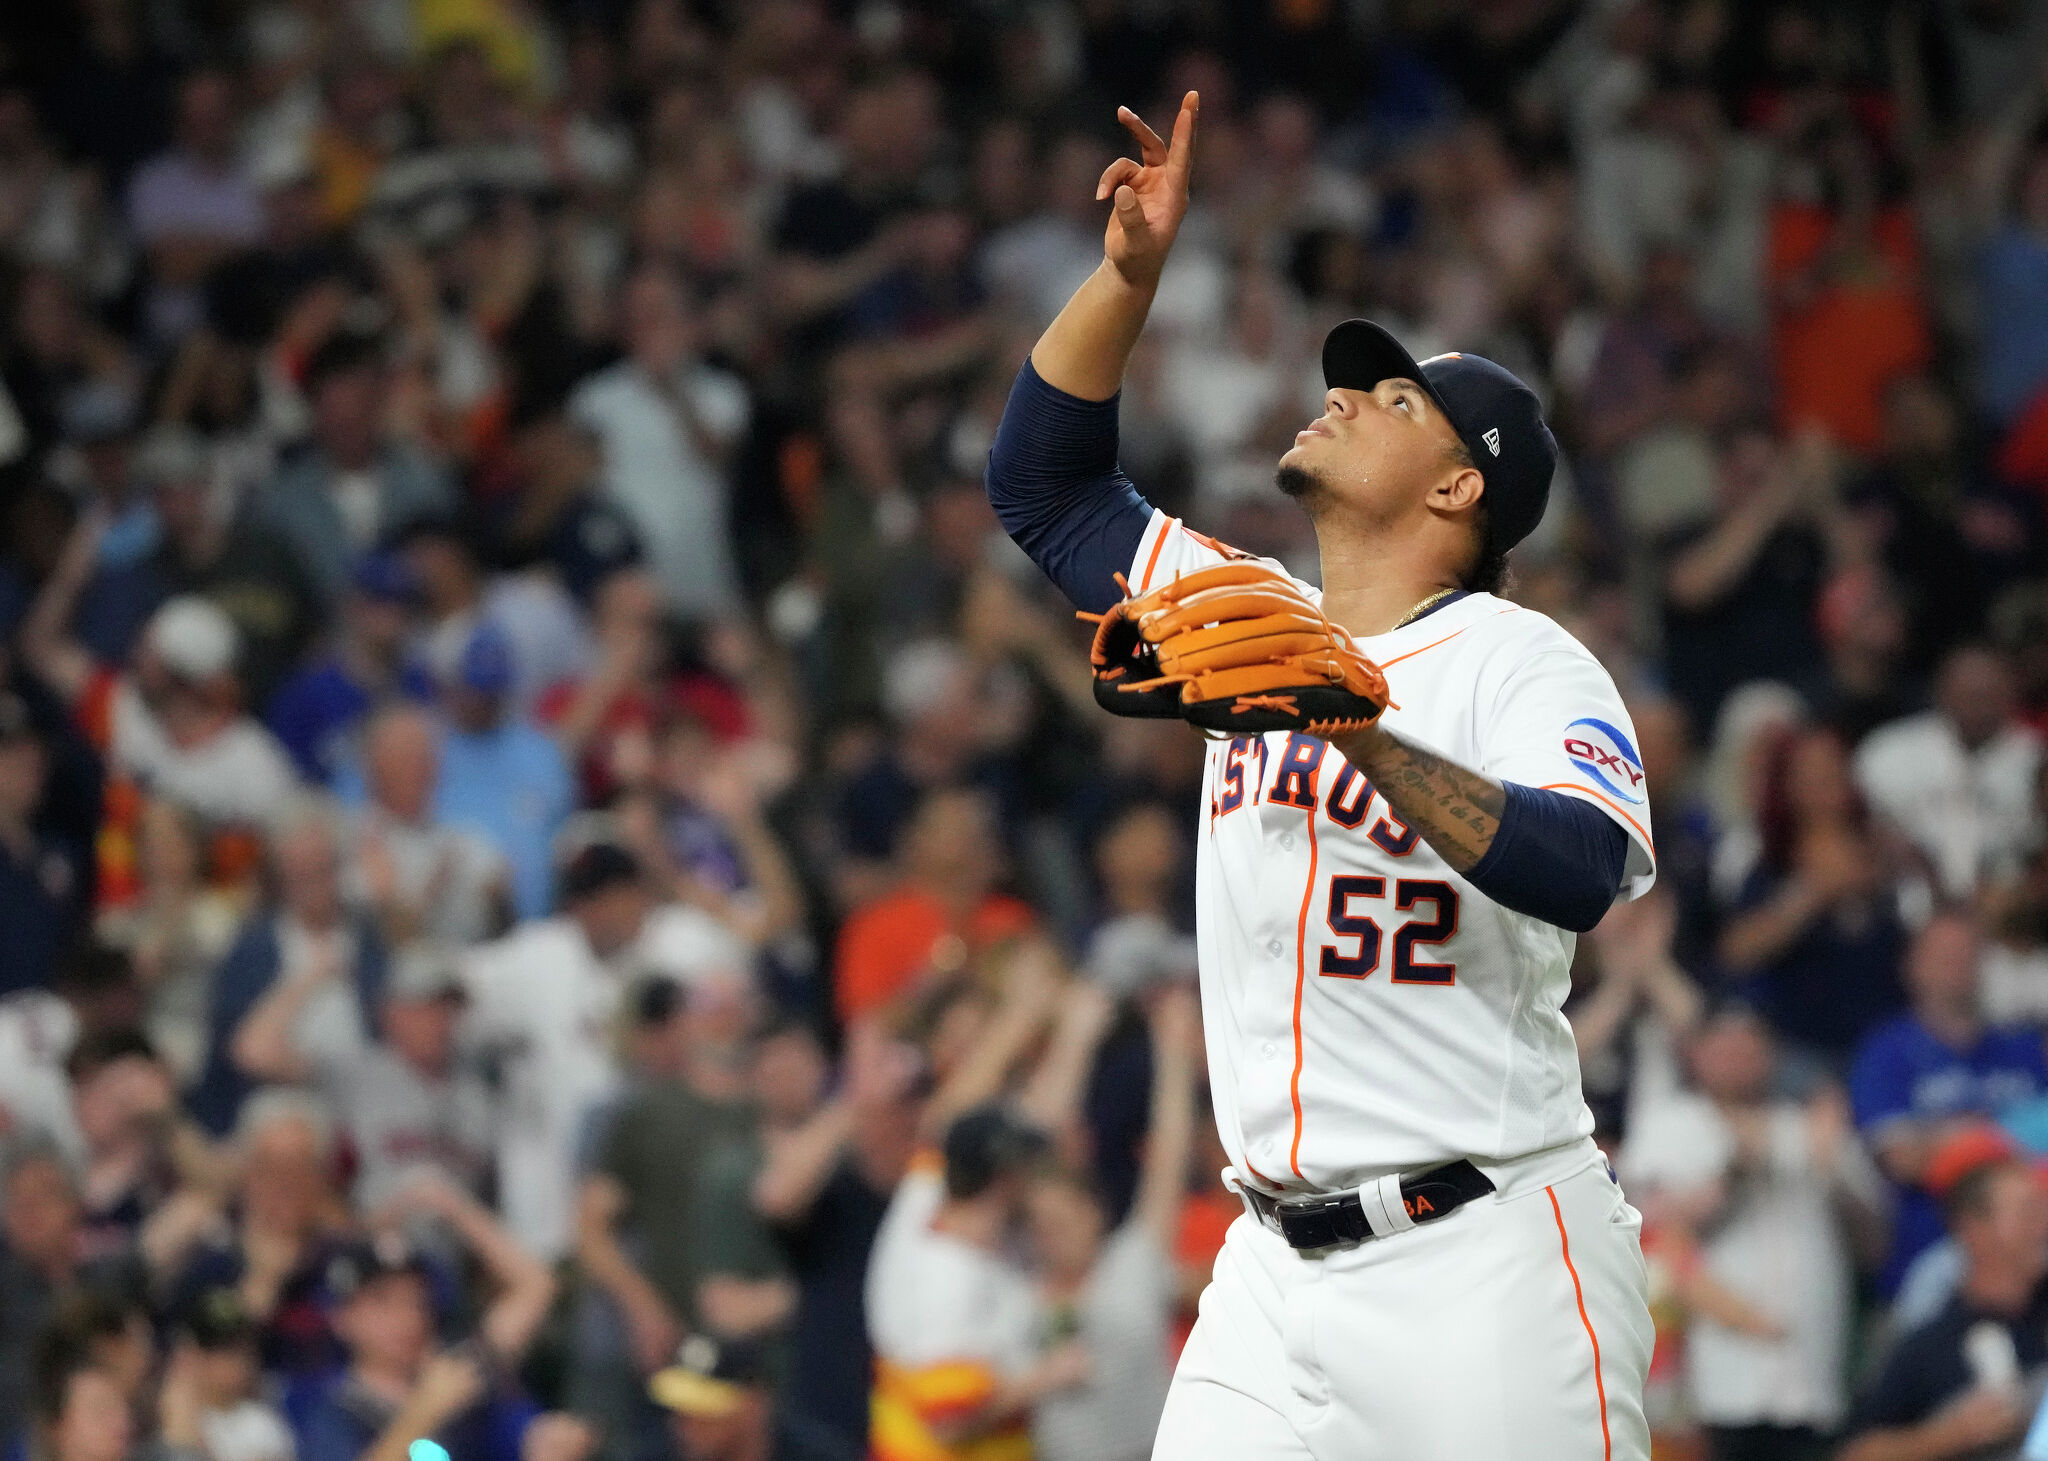 Abreu: 'The Houston Astros created a great culture, great family